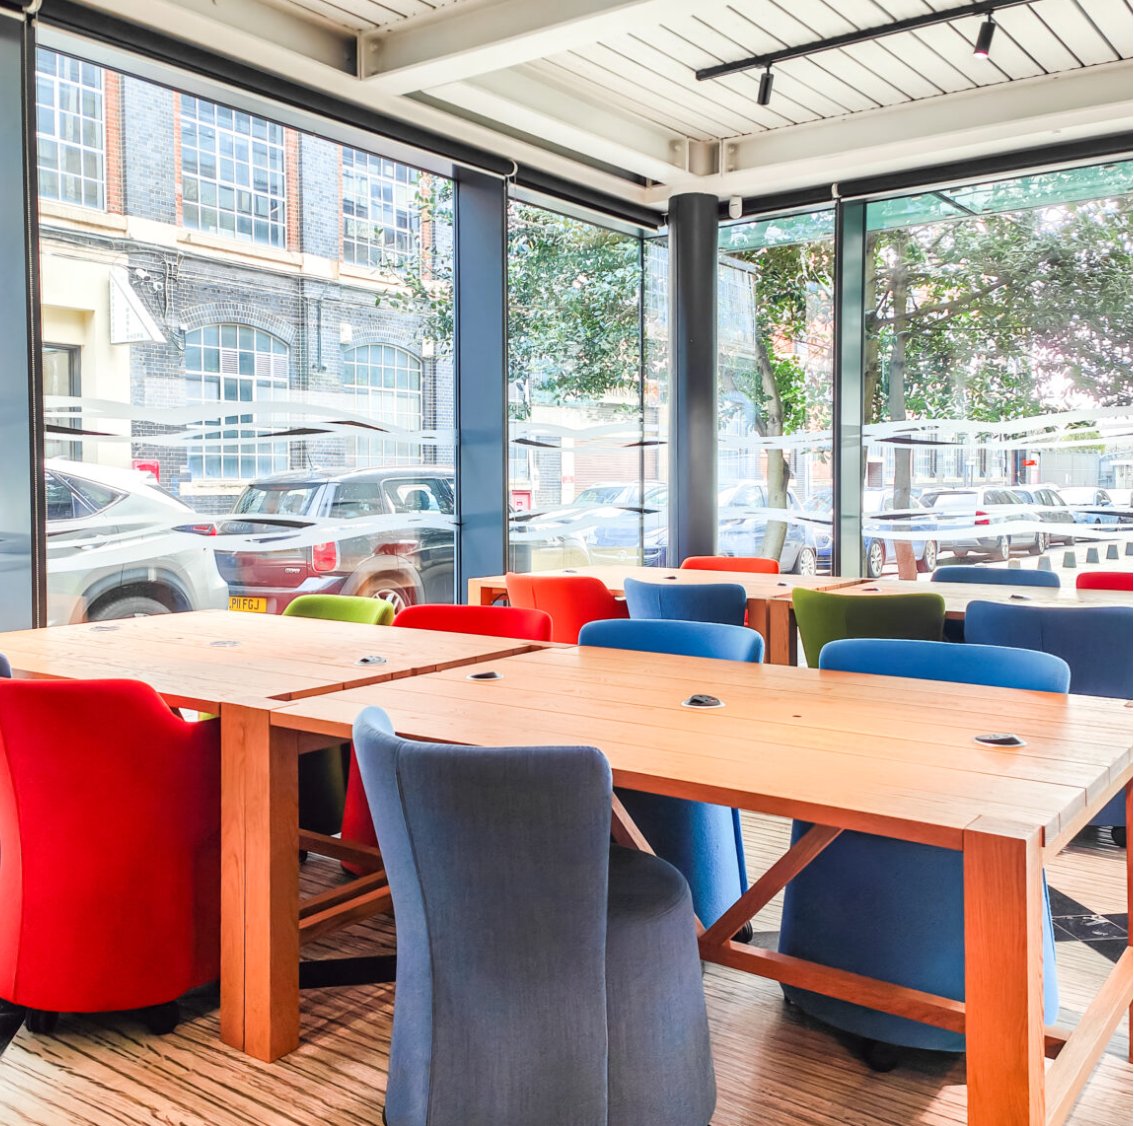 🌟 Looking for a space to boost your creativity and productivity? Look no further! Our co-working spaces provide the perfect environment for collaboration, inspiration, and innovation. Join us today! 🚀 #coworkingspace #creativity #productivity 🌈